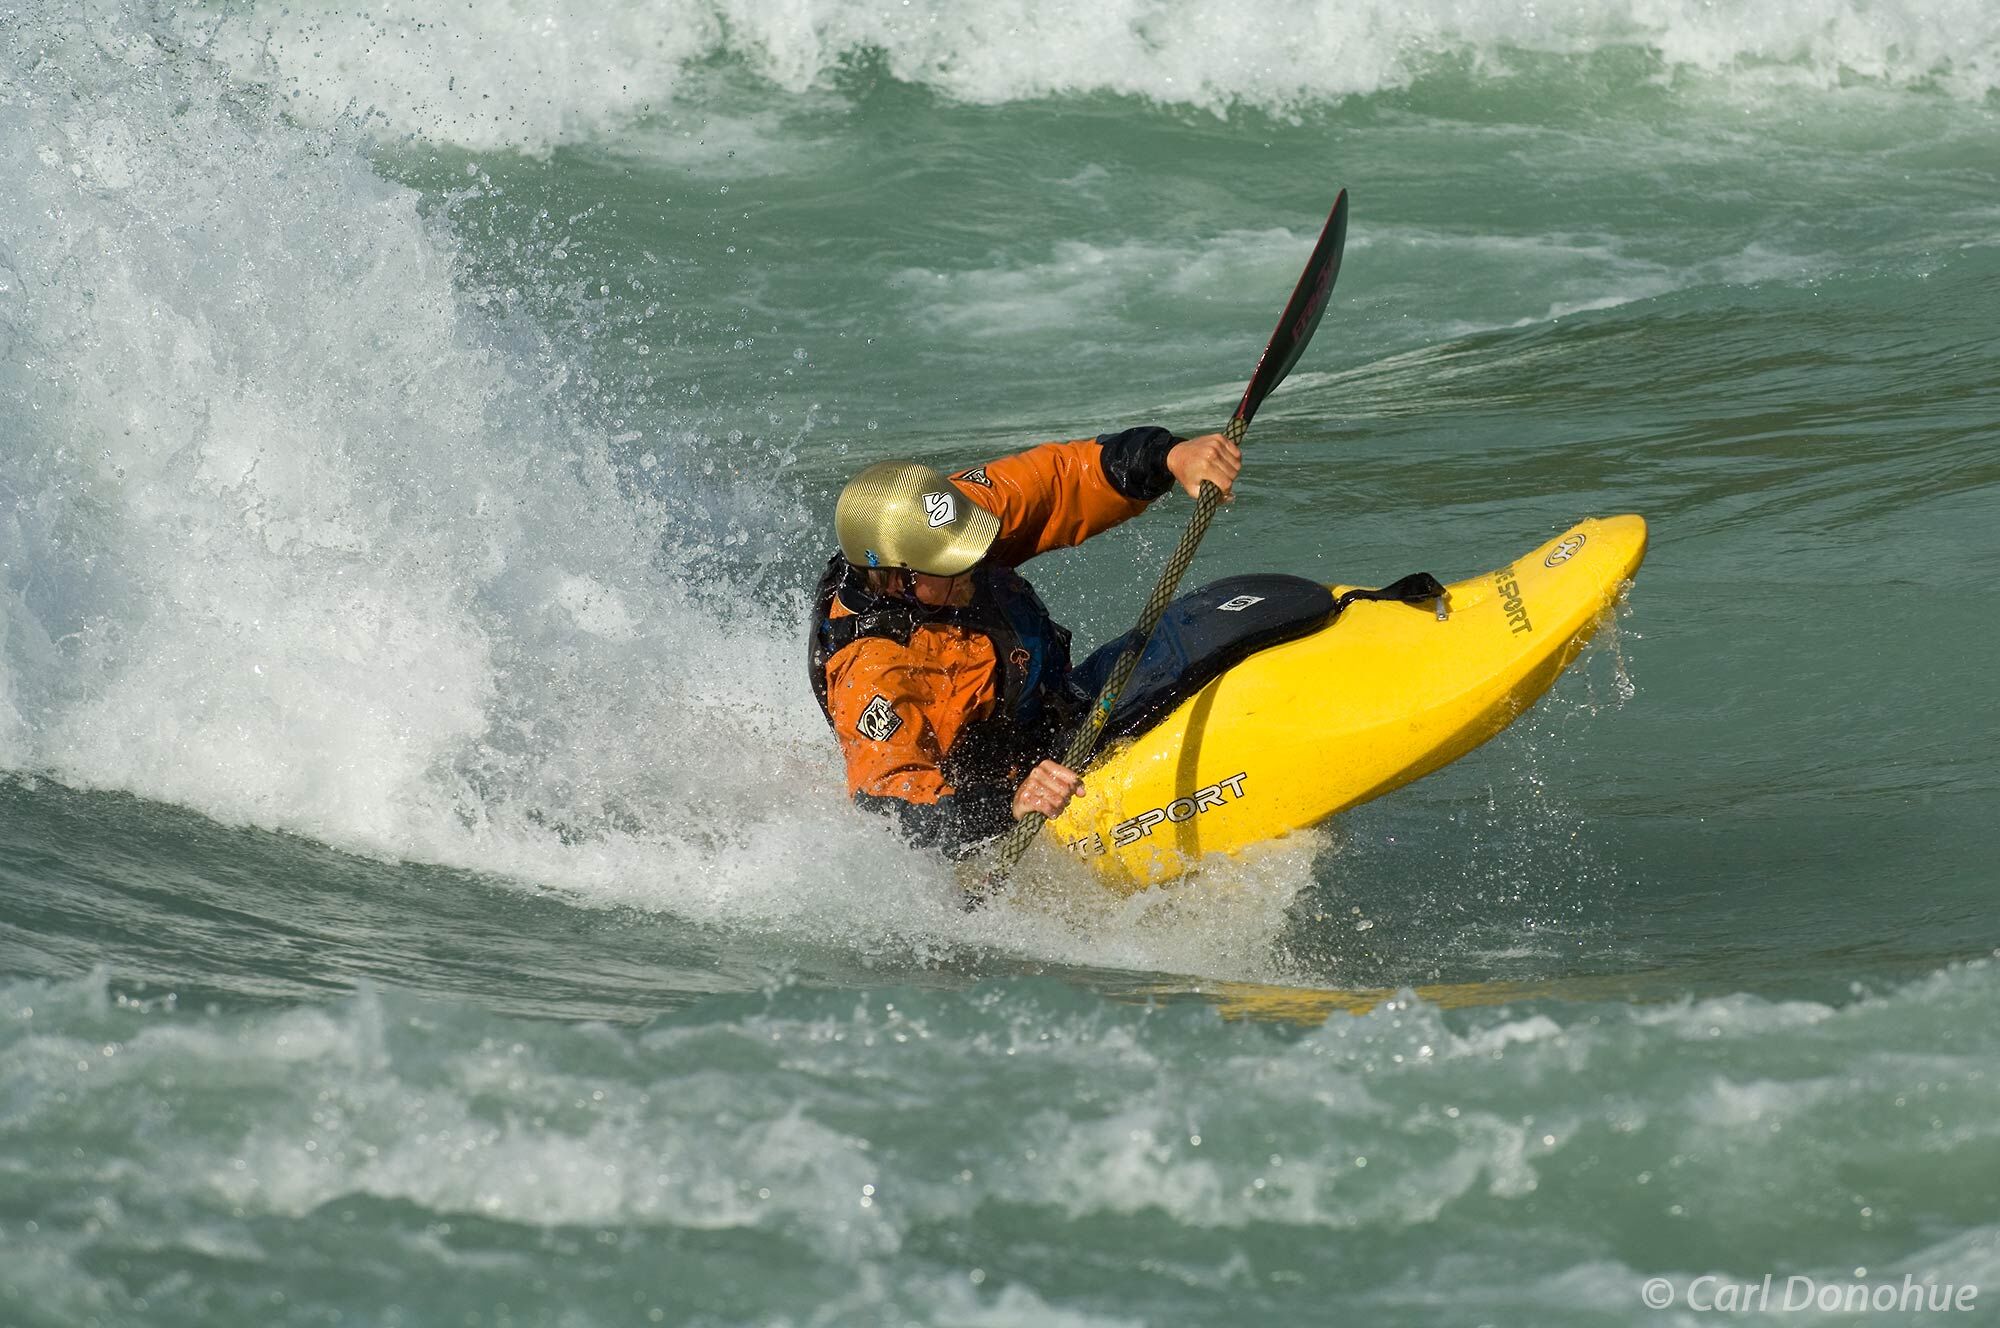 Whitewater kayaking on the Baker River. A standing wave provides Santiago Ibanez, a Peruvian kayaker, with endless opportunity...